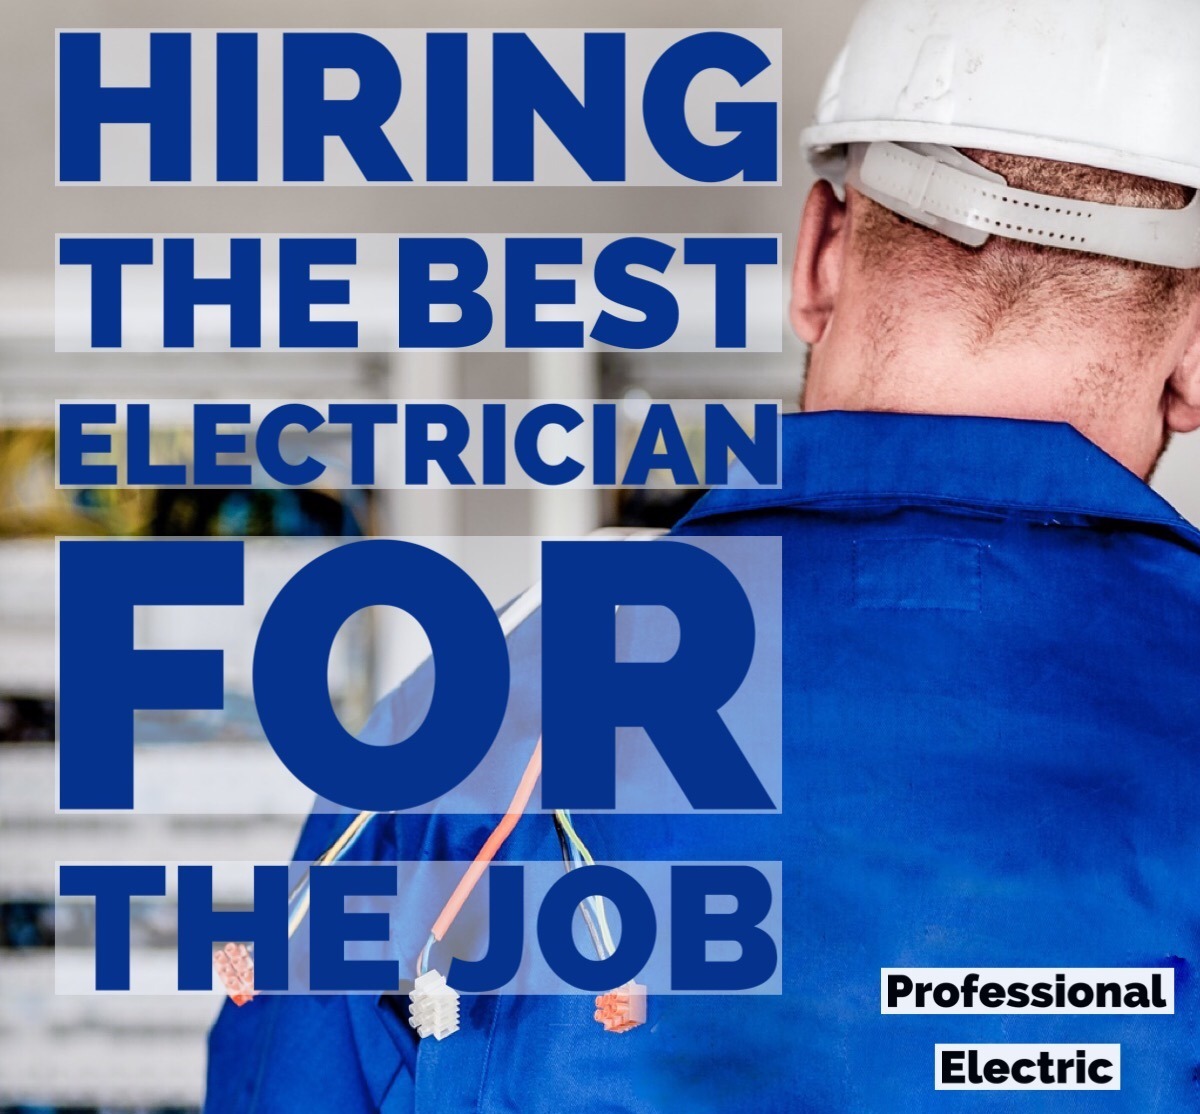 Hiring the Best Electrician for the Job